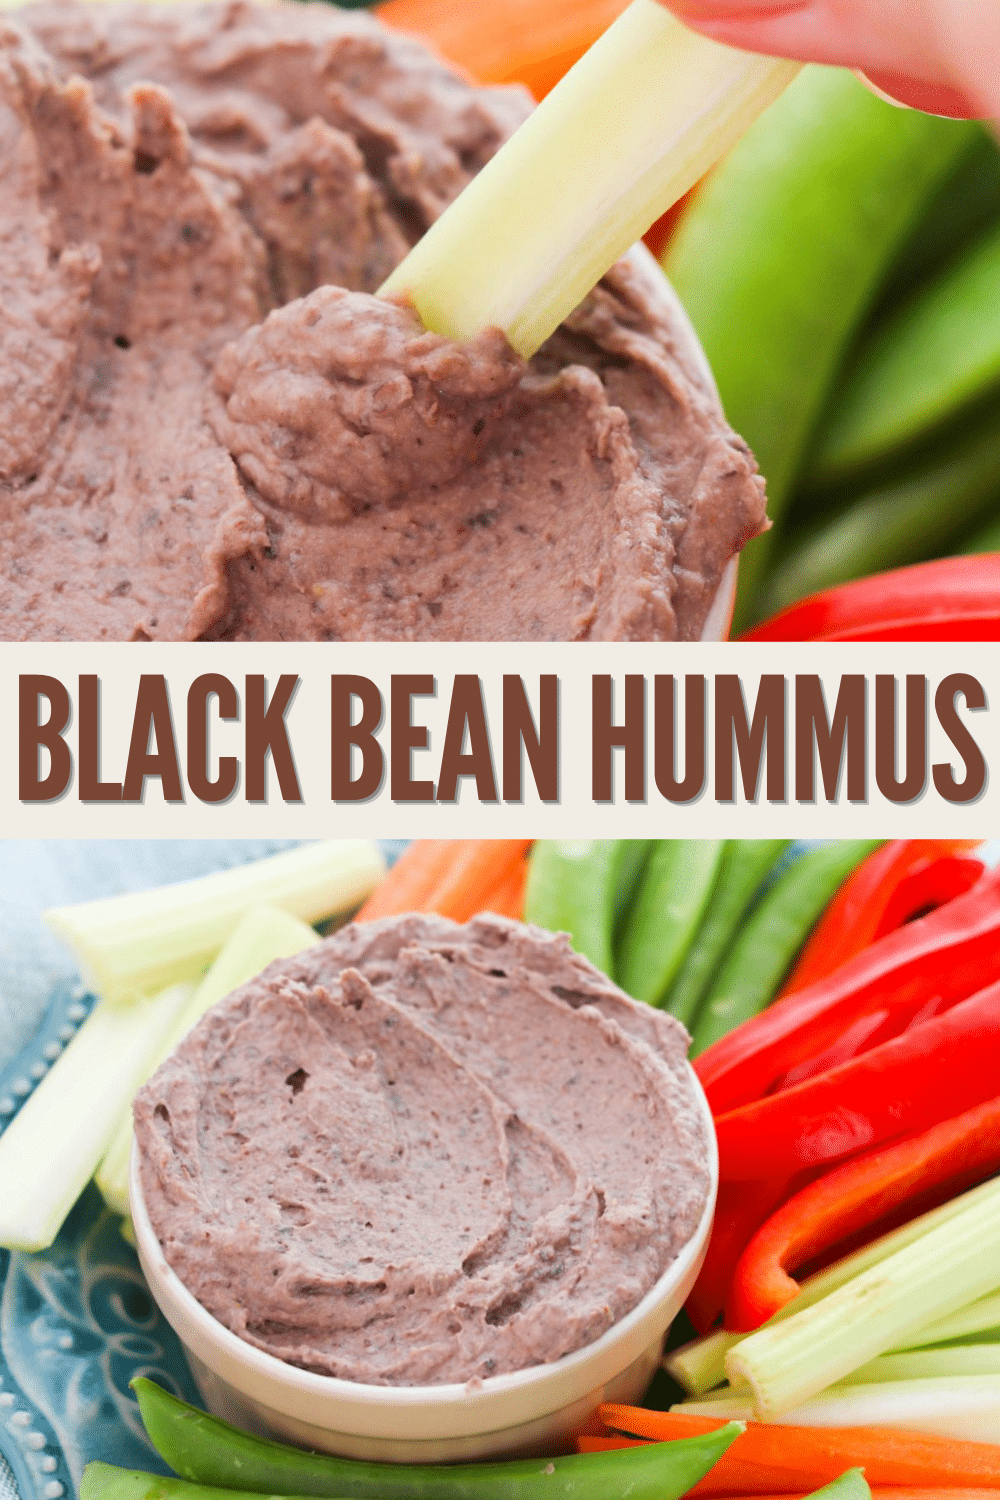 Black Bean Hummus is a fast and easy recipe with just 7 easy ingredients. Wait till you taste the flavor! So simple and delicious! #blackbeanhummus #blackbean #hummus #appetizer #recipe via @wondermomwannab